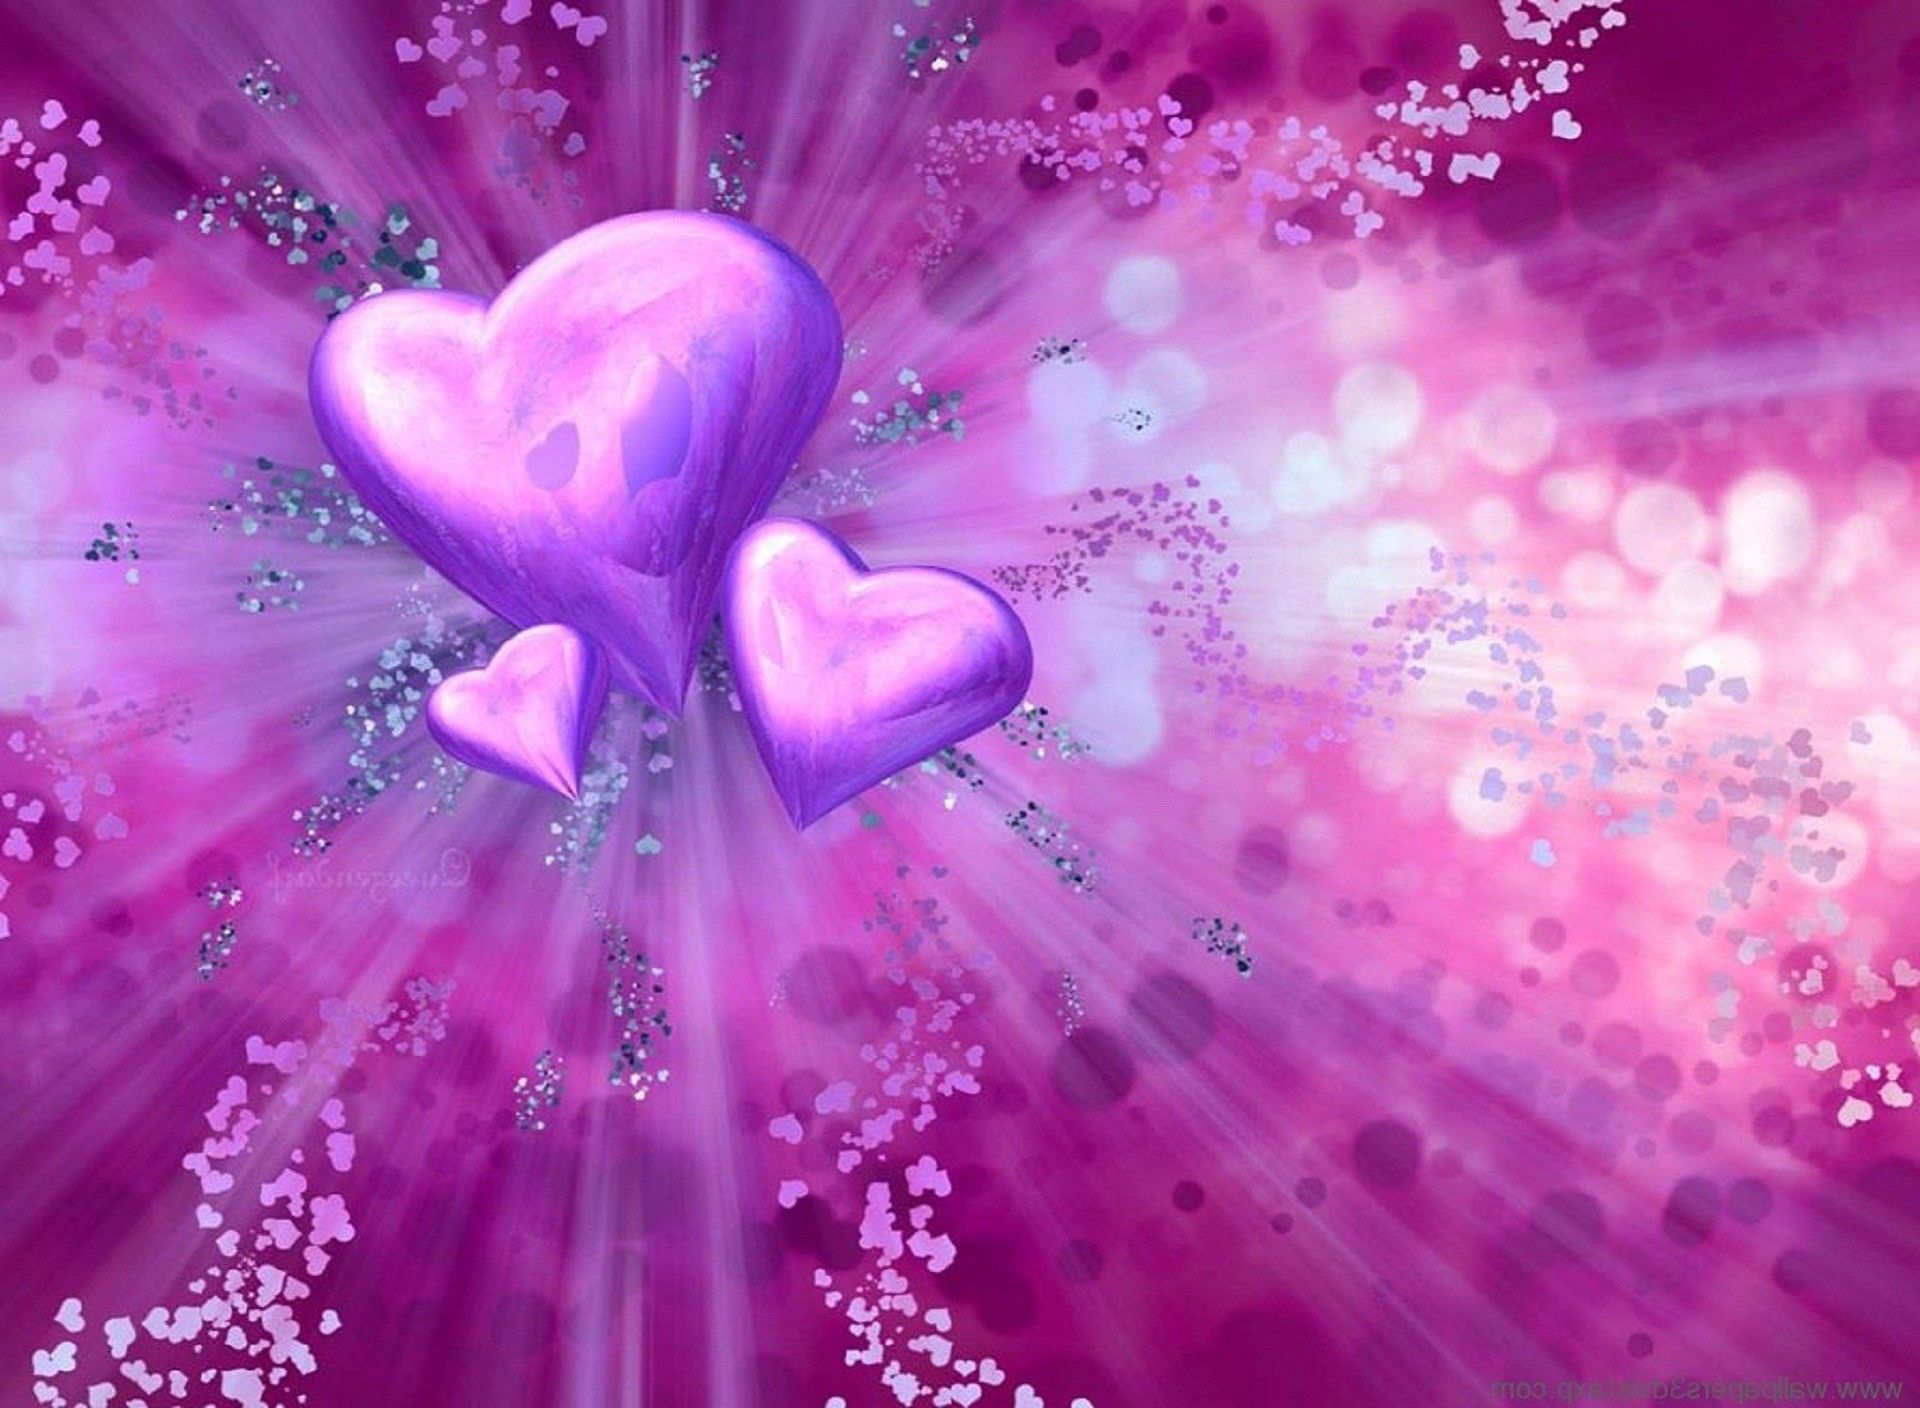 Awesome Love 3d Images & Wallpapers Piripi Ballin - Cute Heart Background Love - HD Wallpaper 